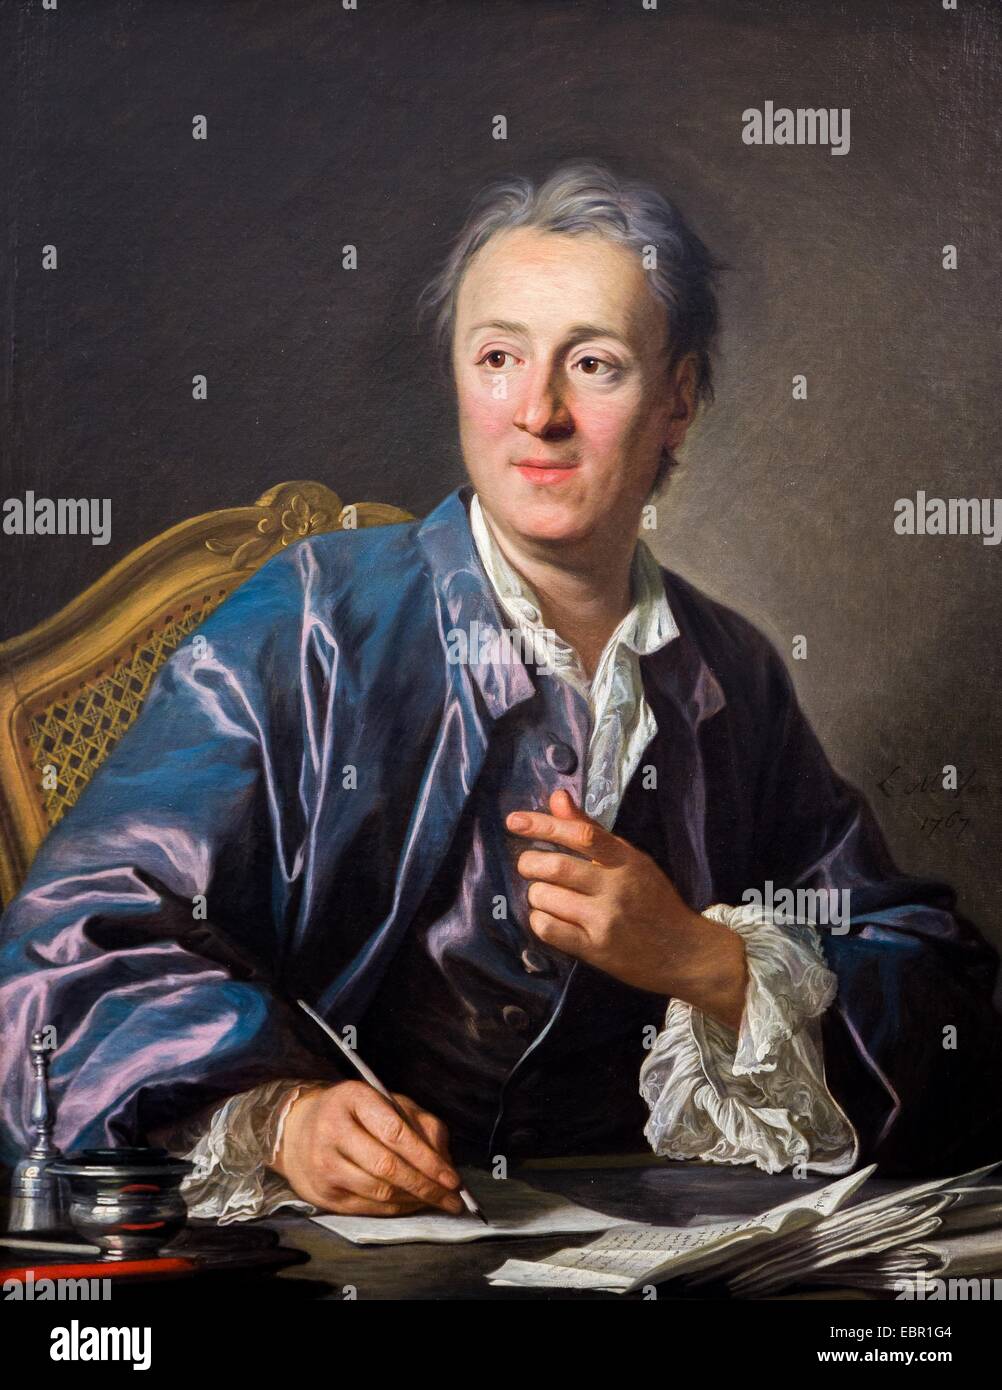 ActiveMuseum 0001860.jpg / Denis Diderot, 1767 - Louis-Michel Van Loo Oil on canvas 25/09/2013  -   / 18th century Collection / Active Museum Stock Photo